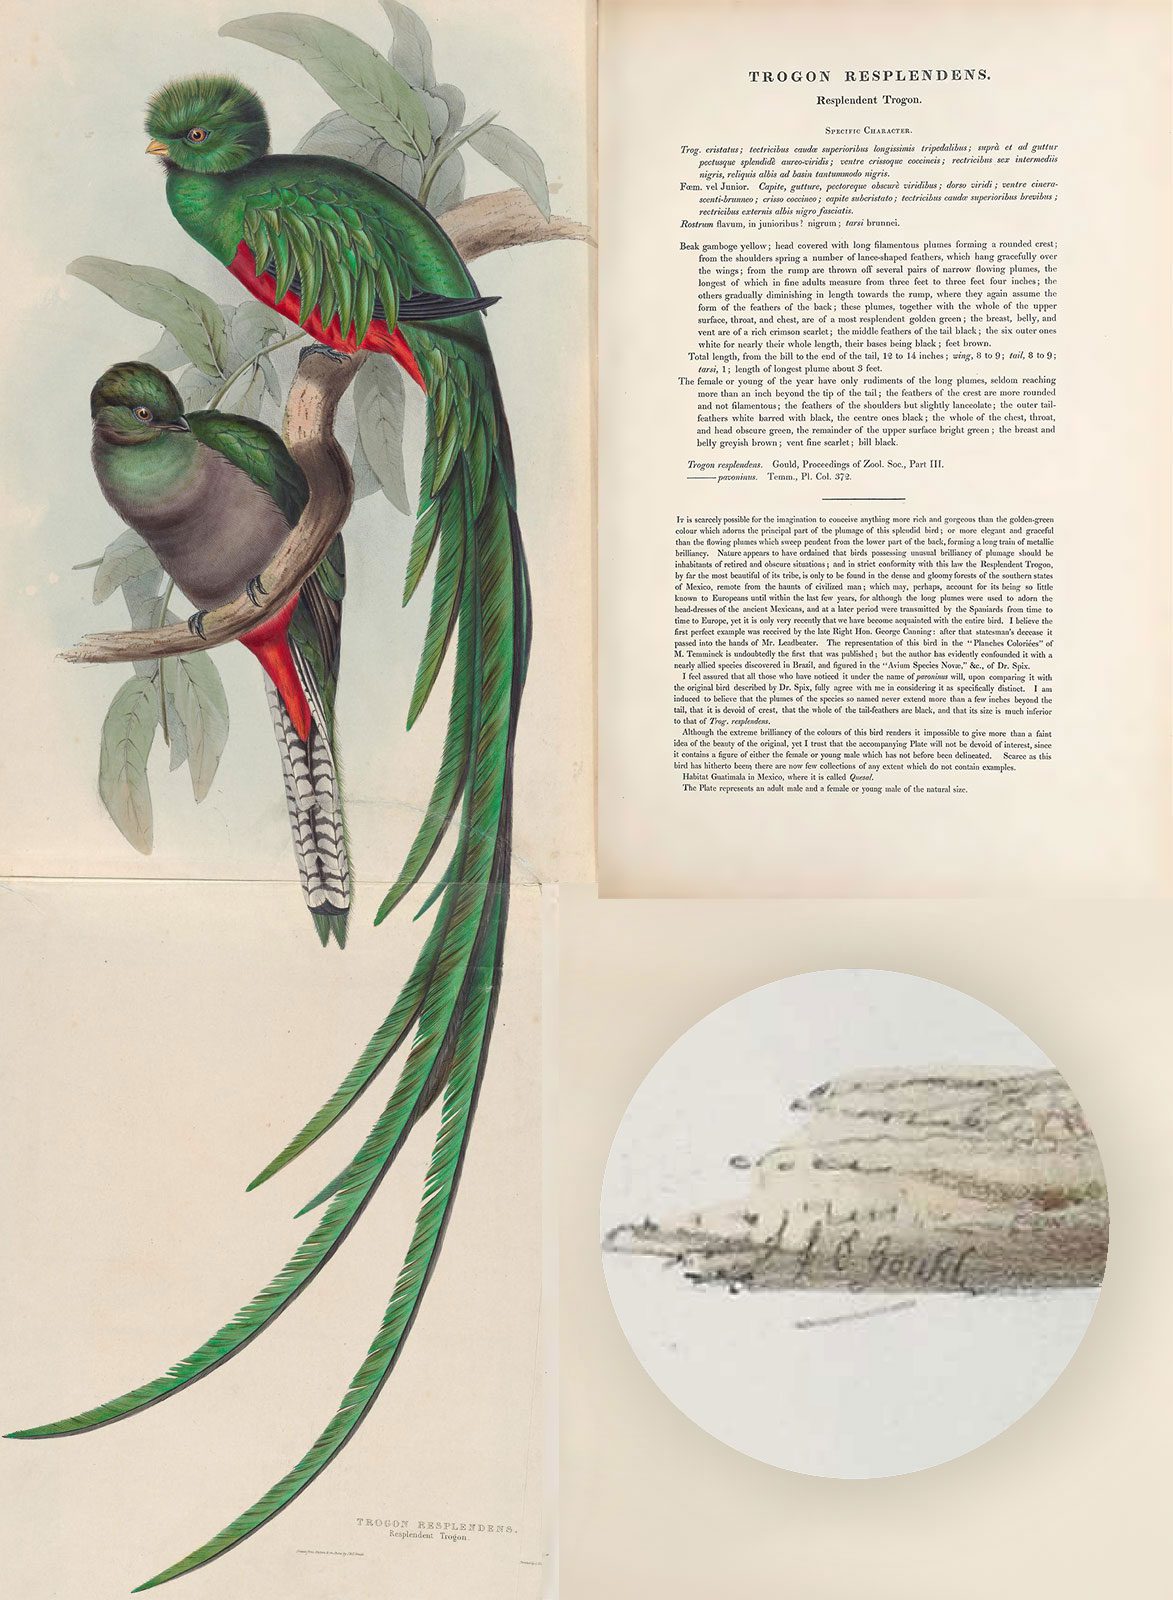 The Resplendent Quetzal account from A Monograph of the Trogonidae, or Family of Trogons. The left side depicts female and male quetzals; the right side contains text about this species.